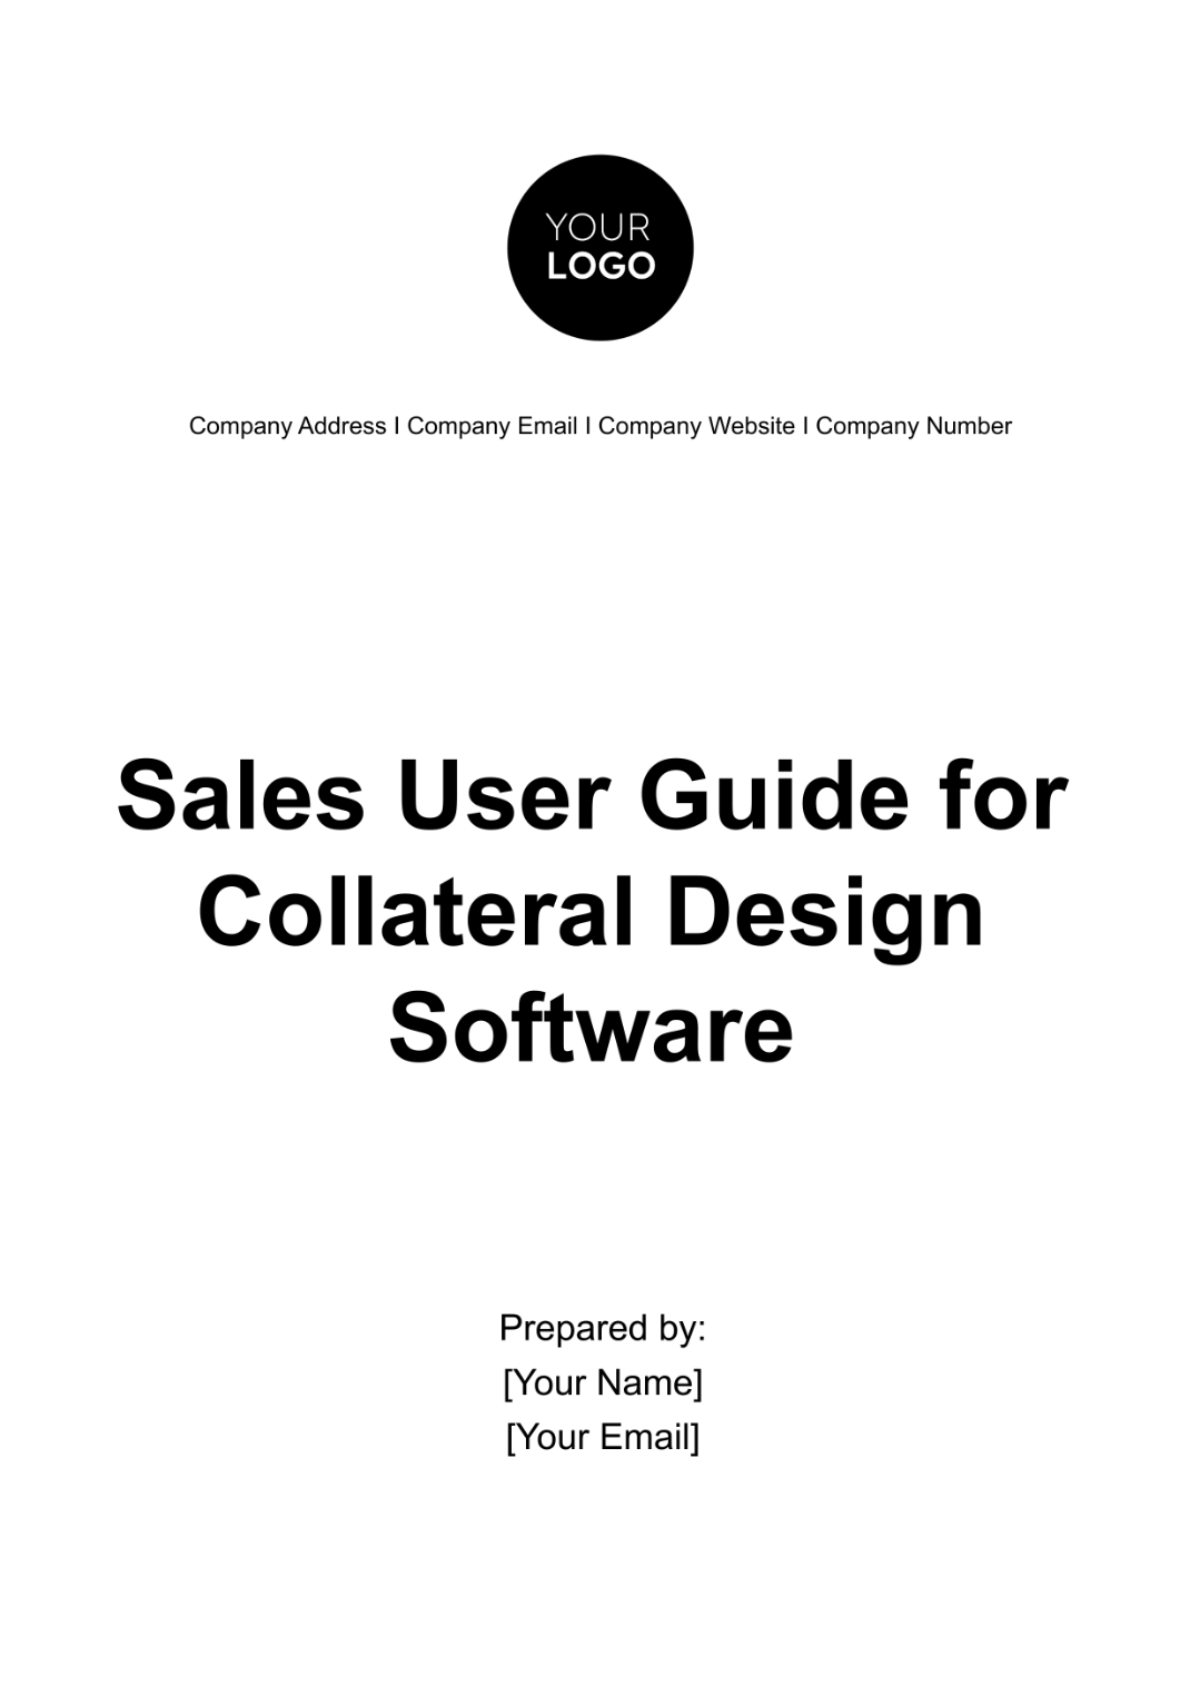 Sales User Guide for Collateral Design Software Template